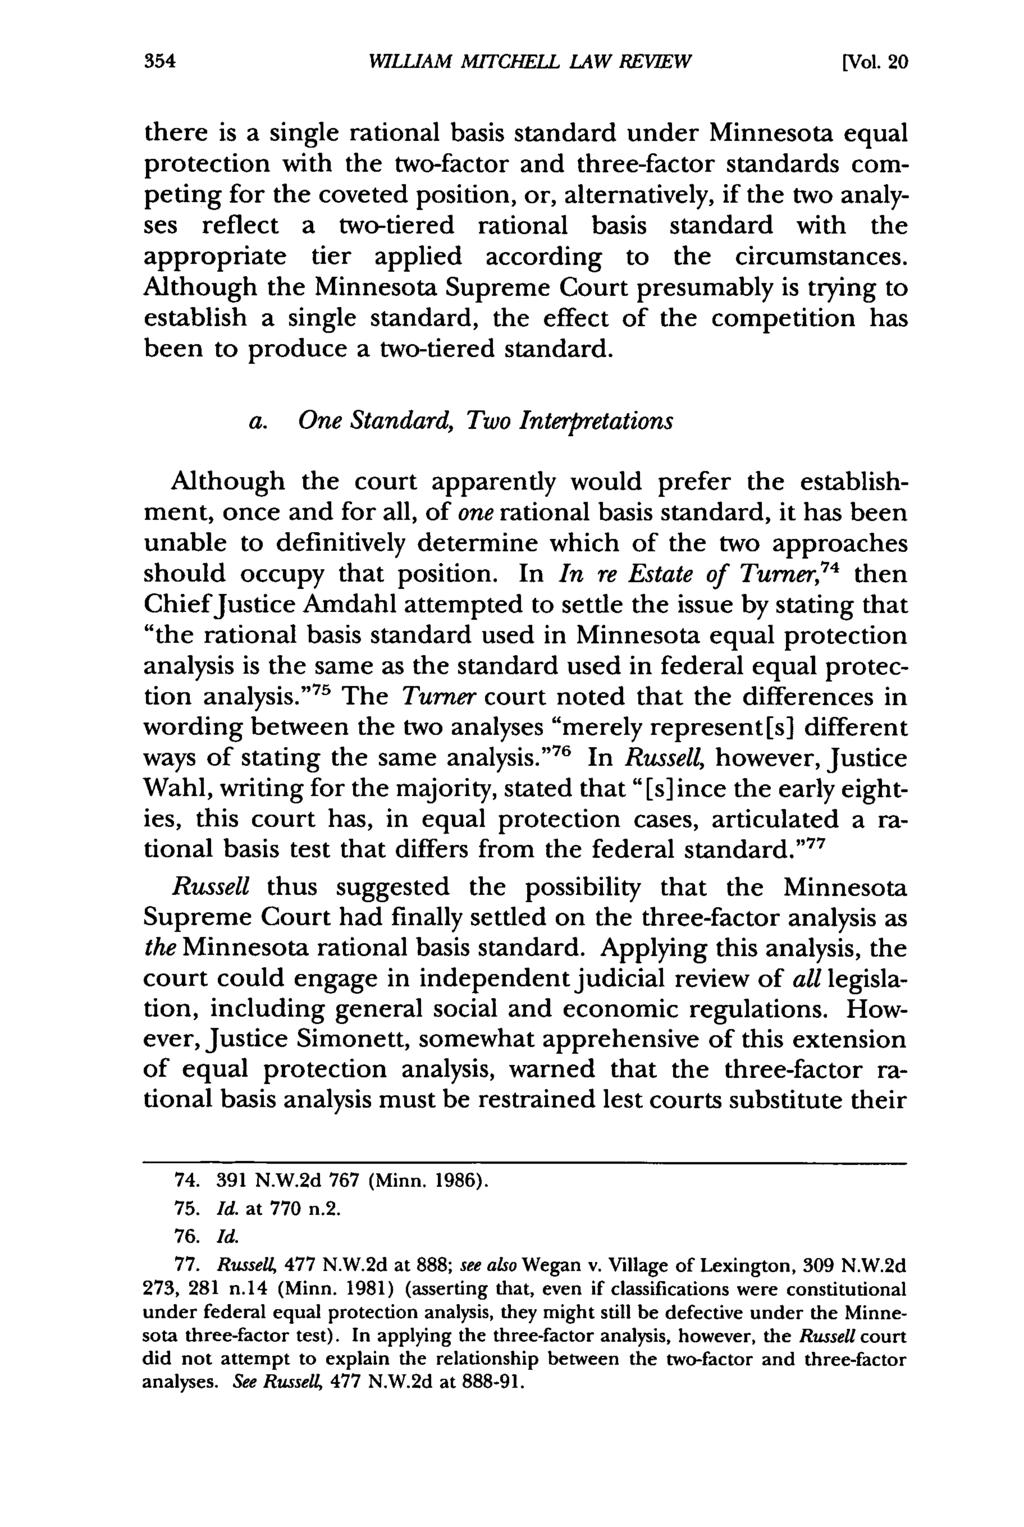 William Mitchell WILLIAM Law Review, M1TCHELL Vol. 20, LAW Iss. 2 REVIEW [1994], Art. 5 [Vol.